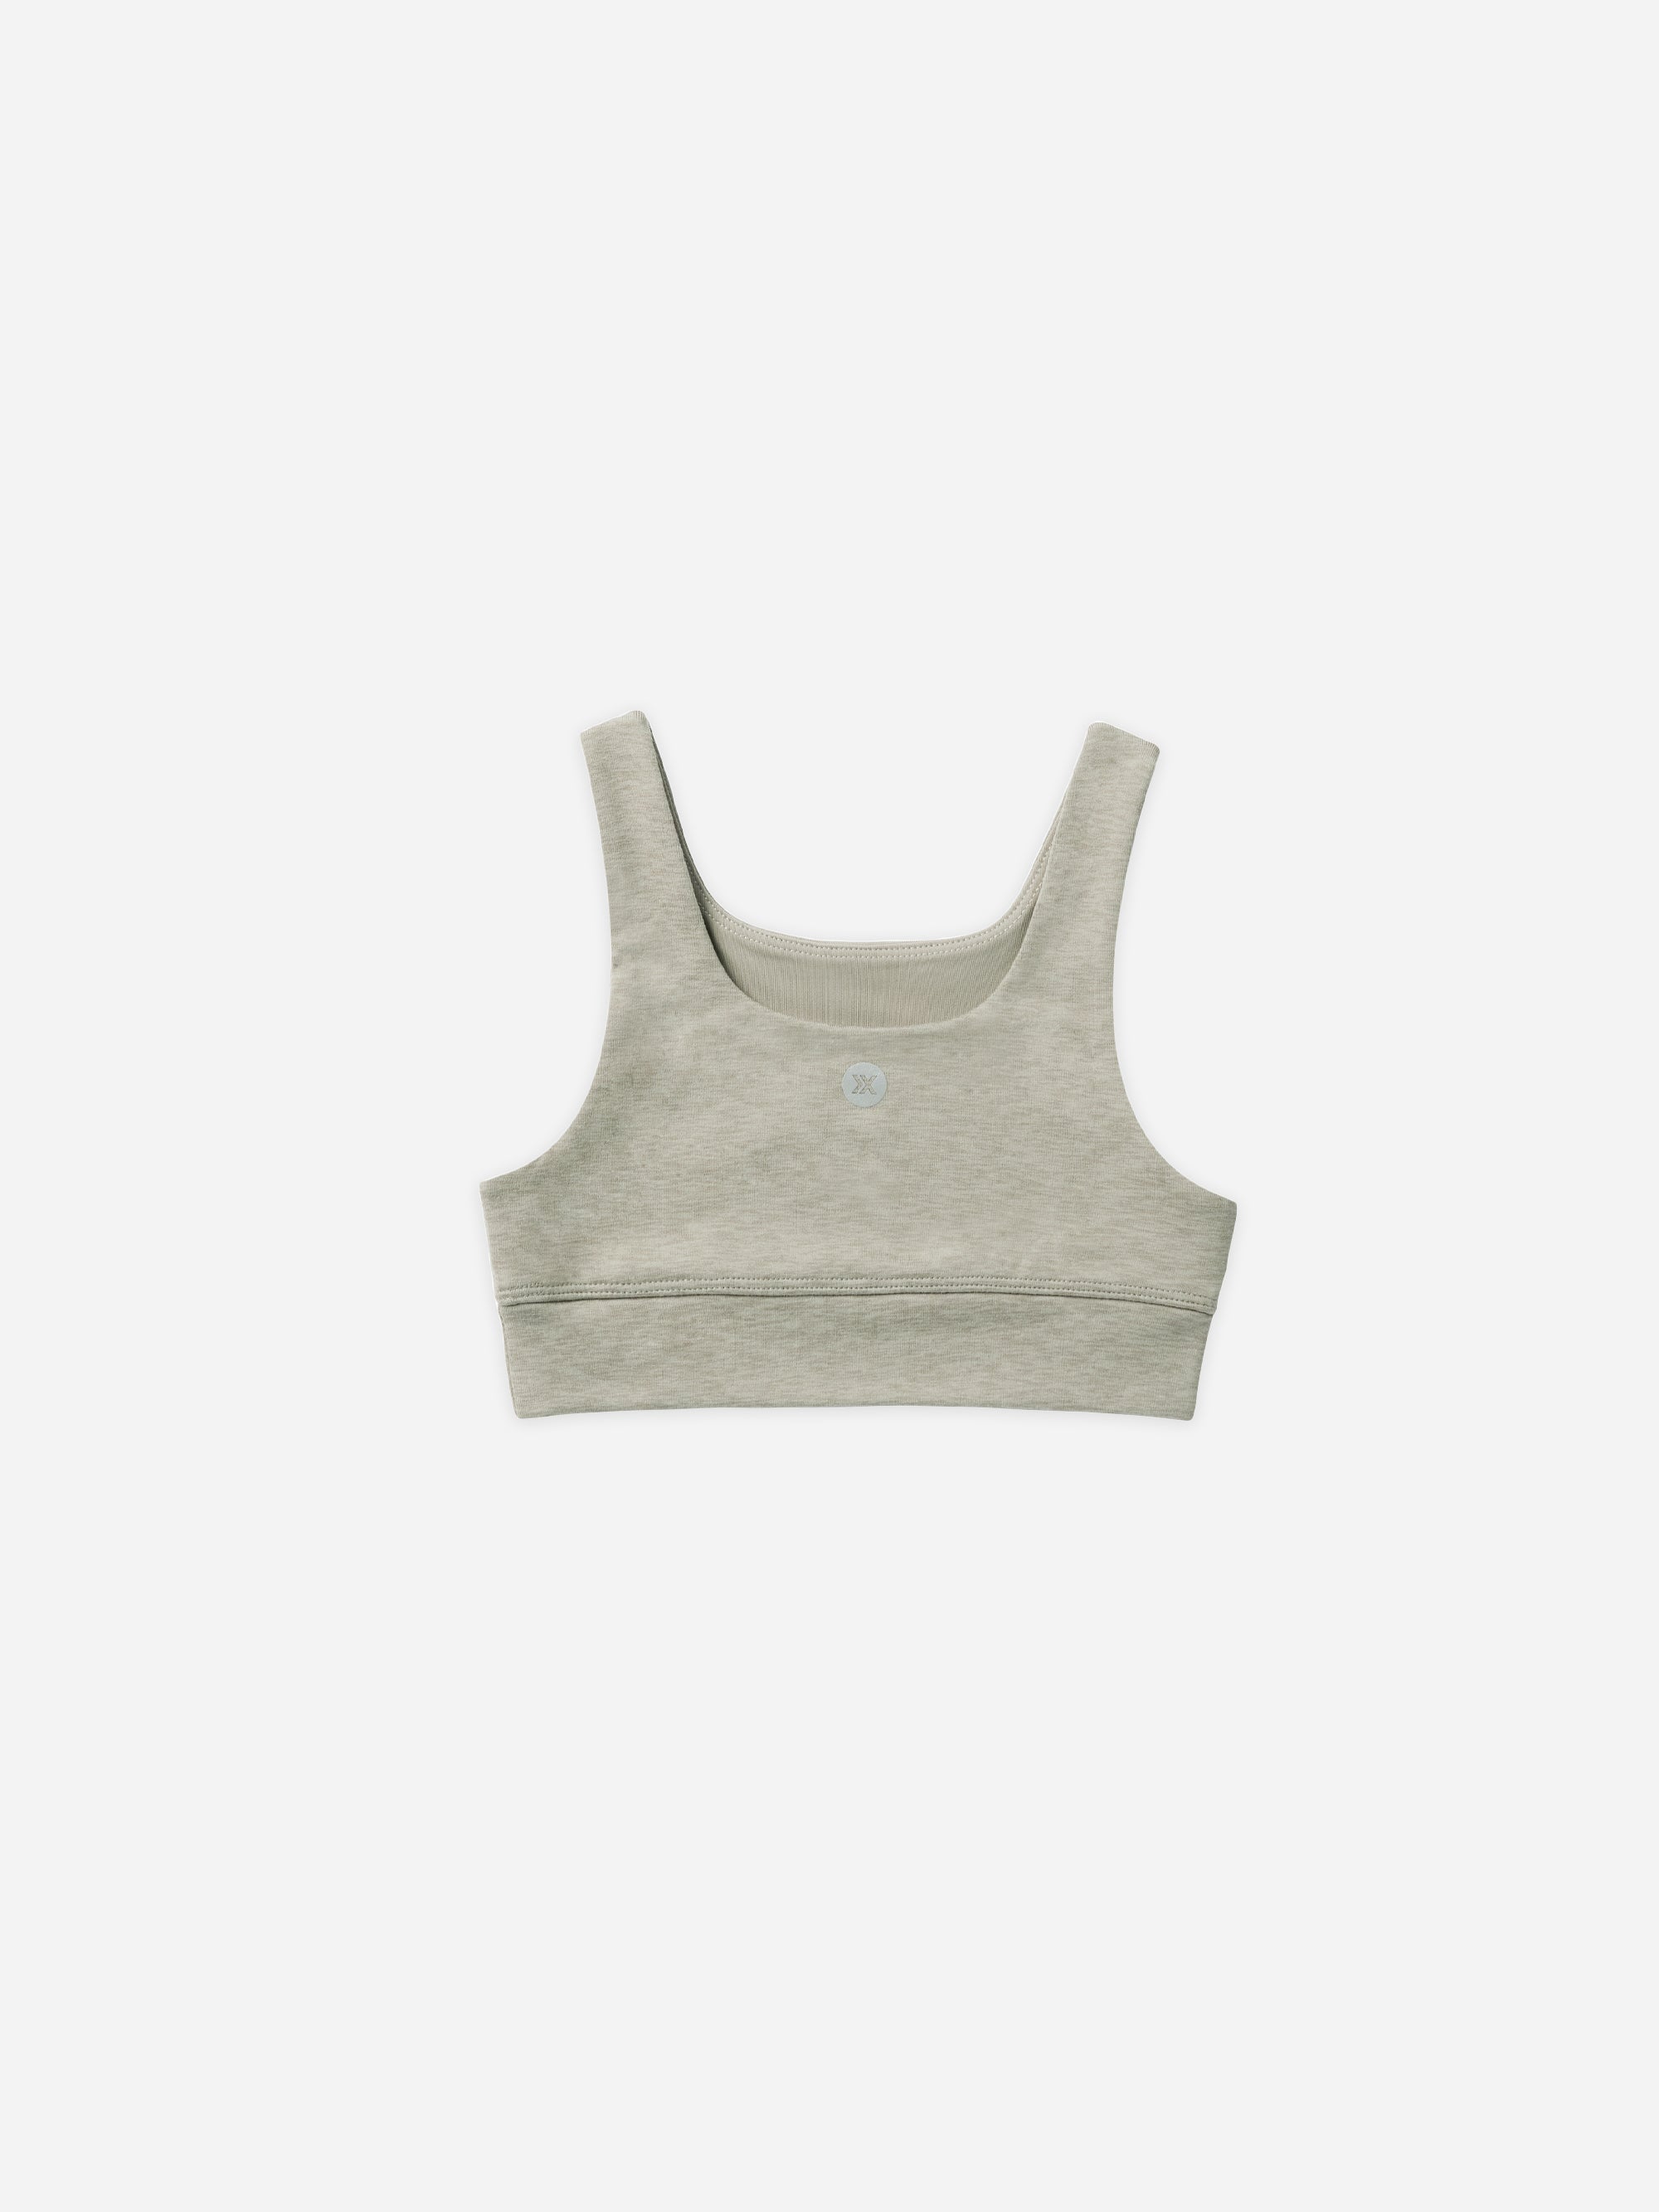 Swift Sports Bra || Heathered Sage - Rylee + Cru | Kids Clothes | Trendy Baby Clothes | Modern Infant Outfits |